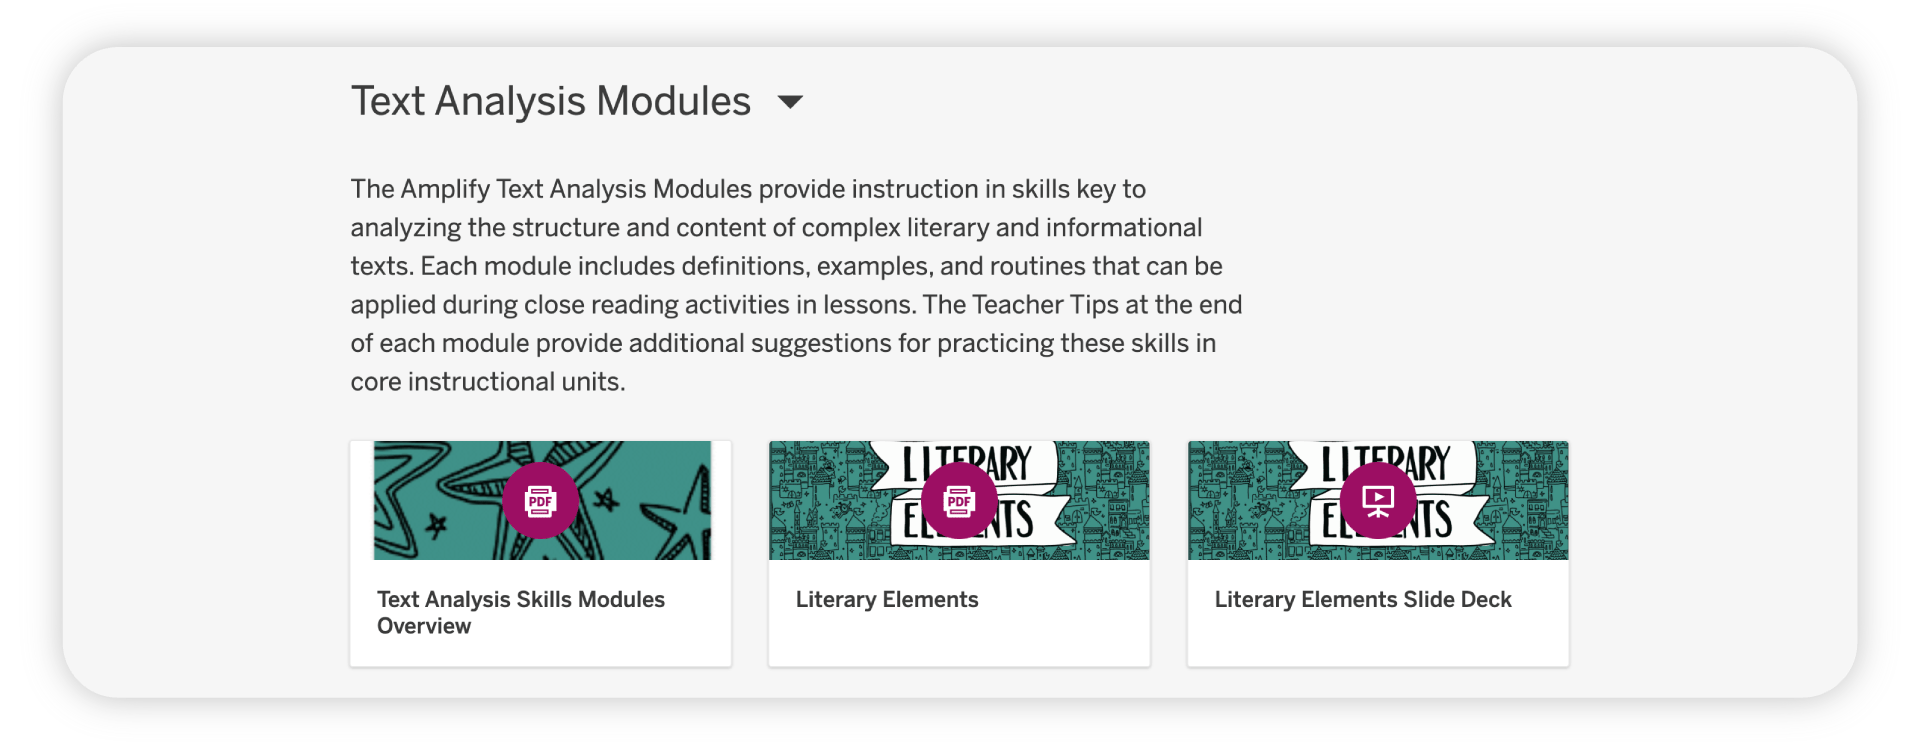 Three labeled icons of educational modules on text analysis: 